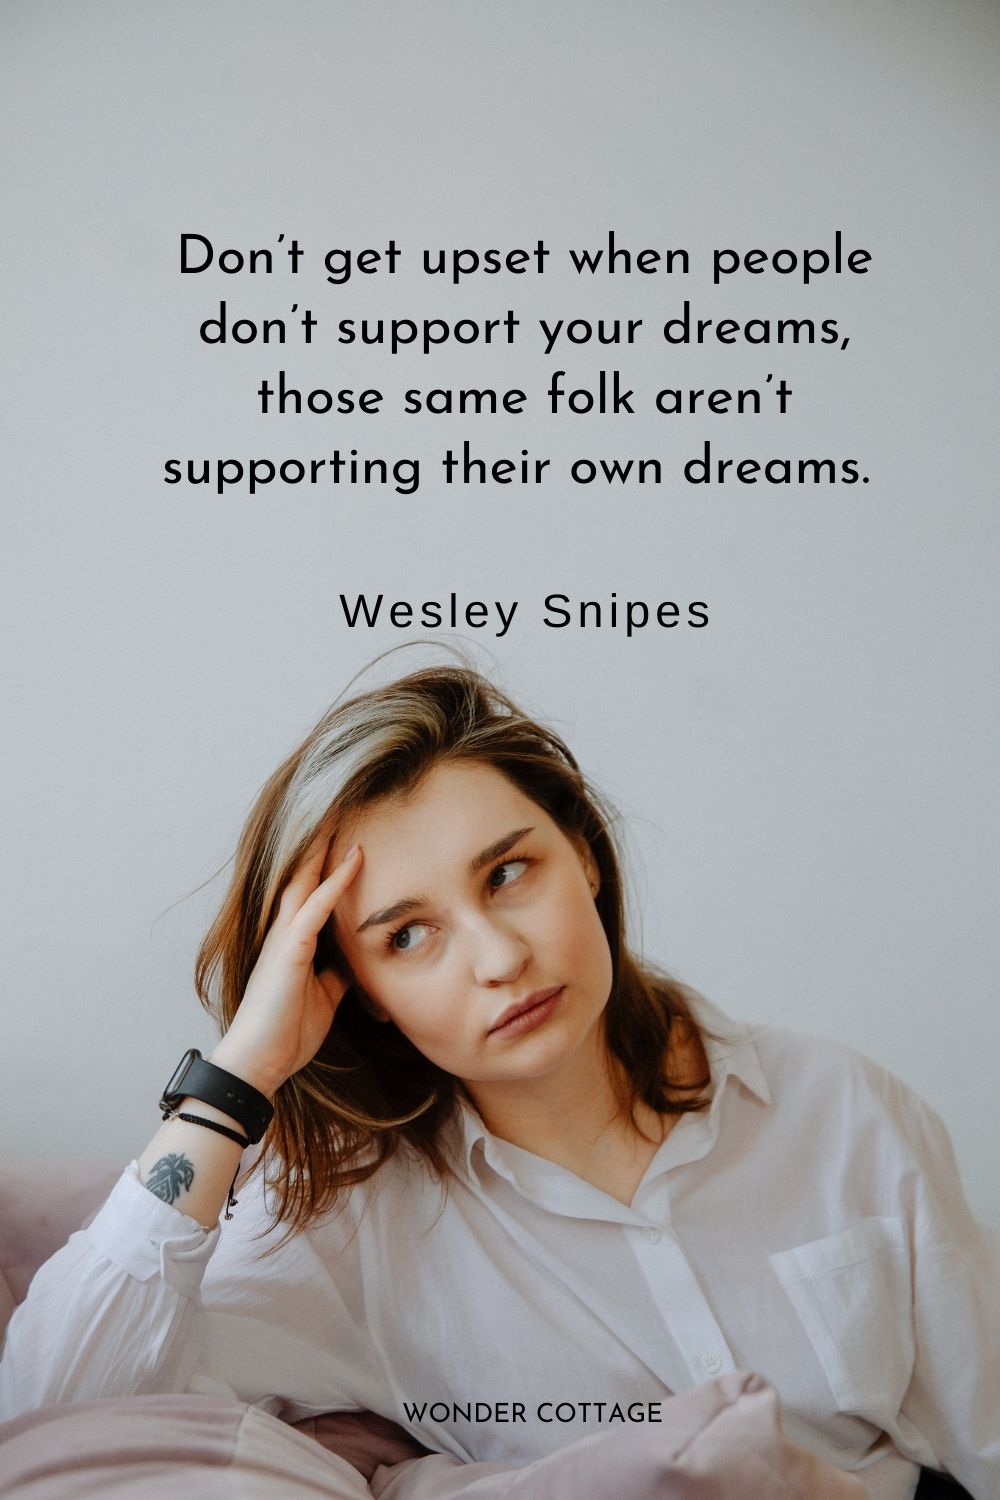 Don’t get upset when people don’t support your dreams, those same folk aren’t supporting their own dreams.  Wesley Snipes